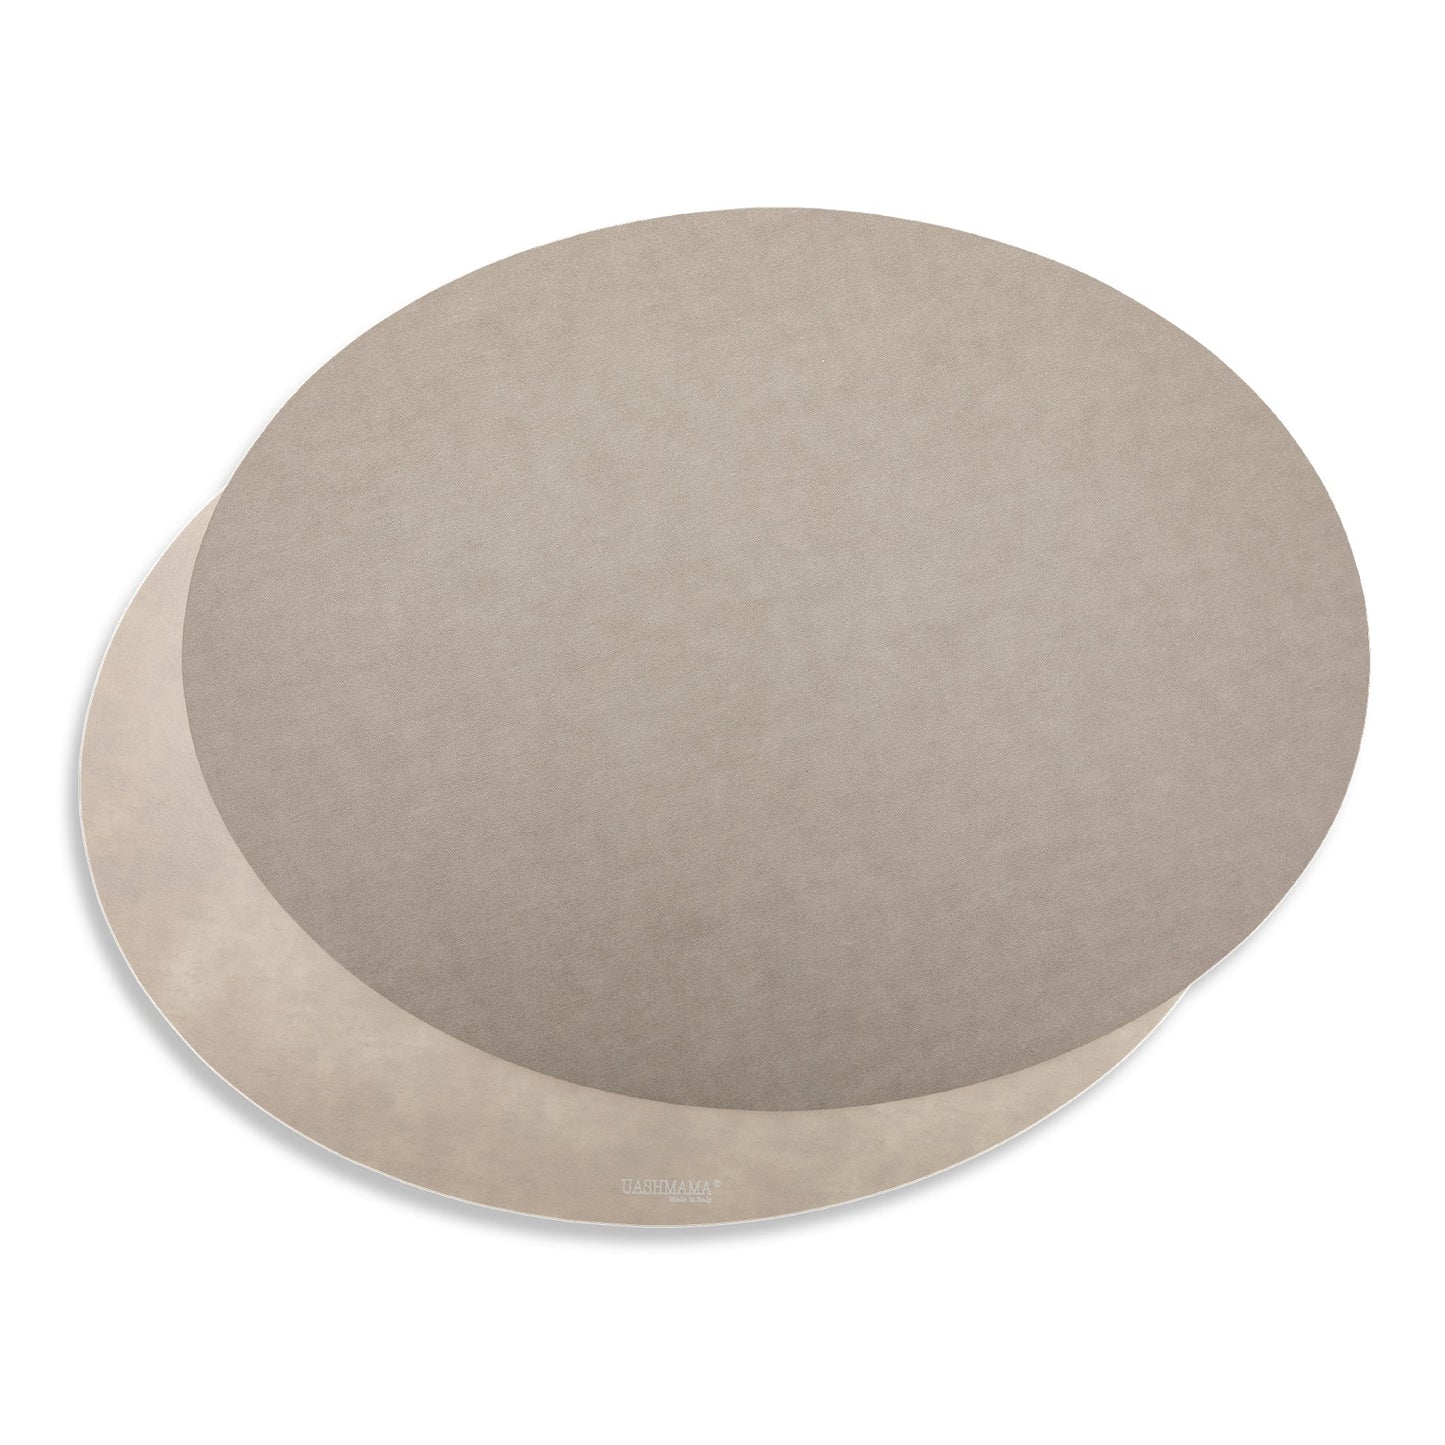 Two oval washable paper placemats are shown on top of each other. The one in the rear is beige and the one on top is grey.